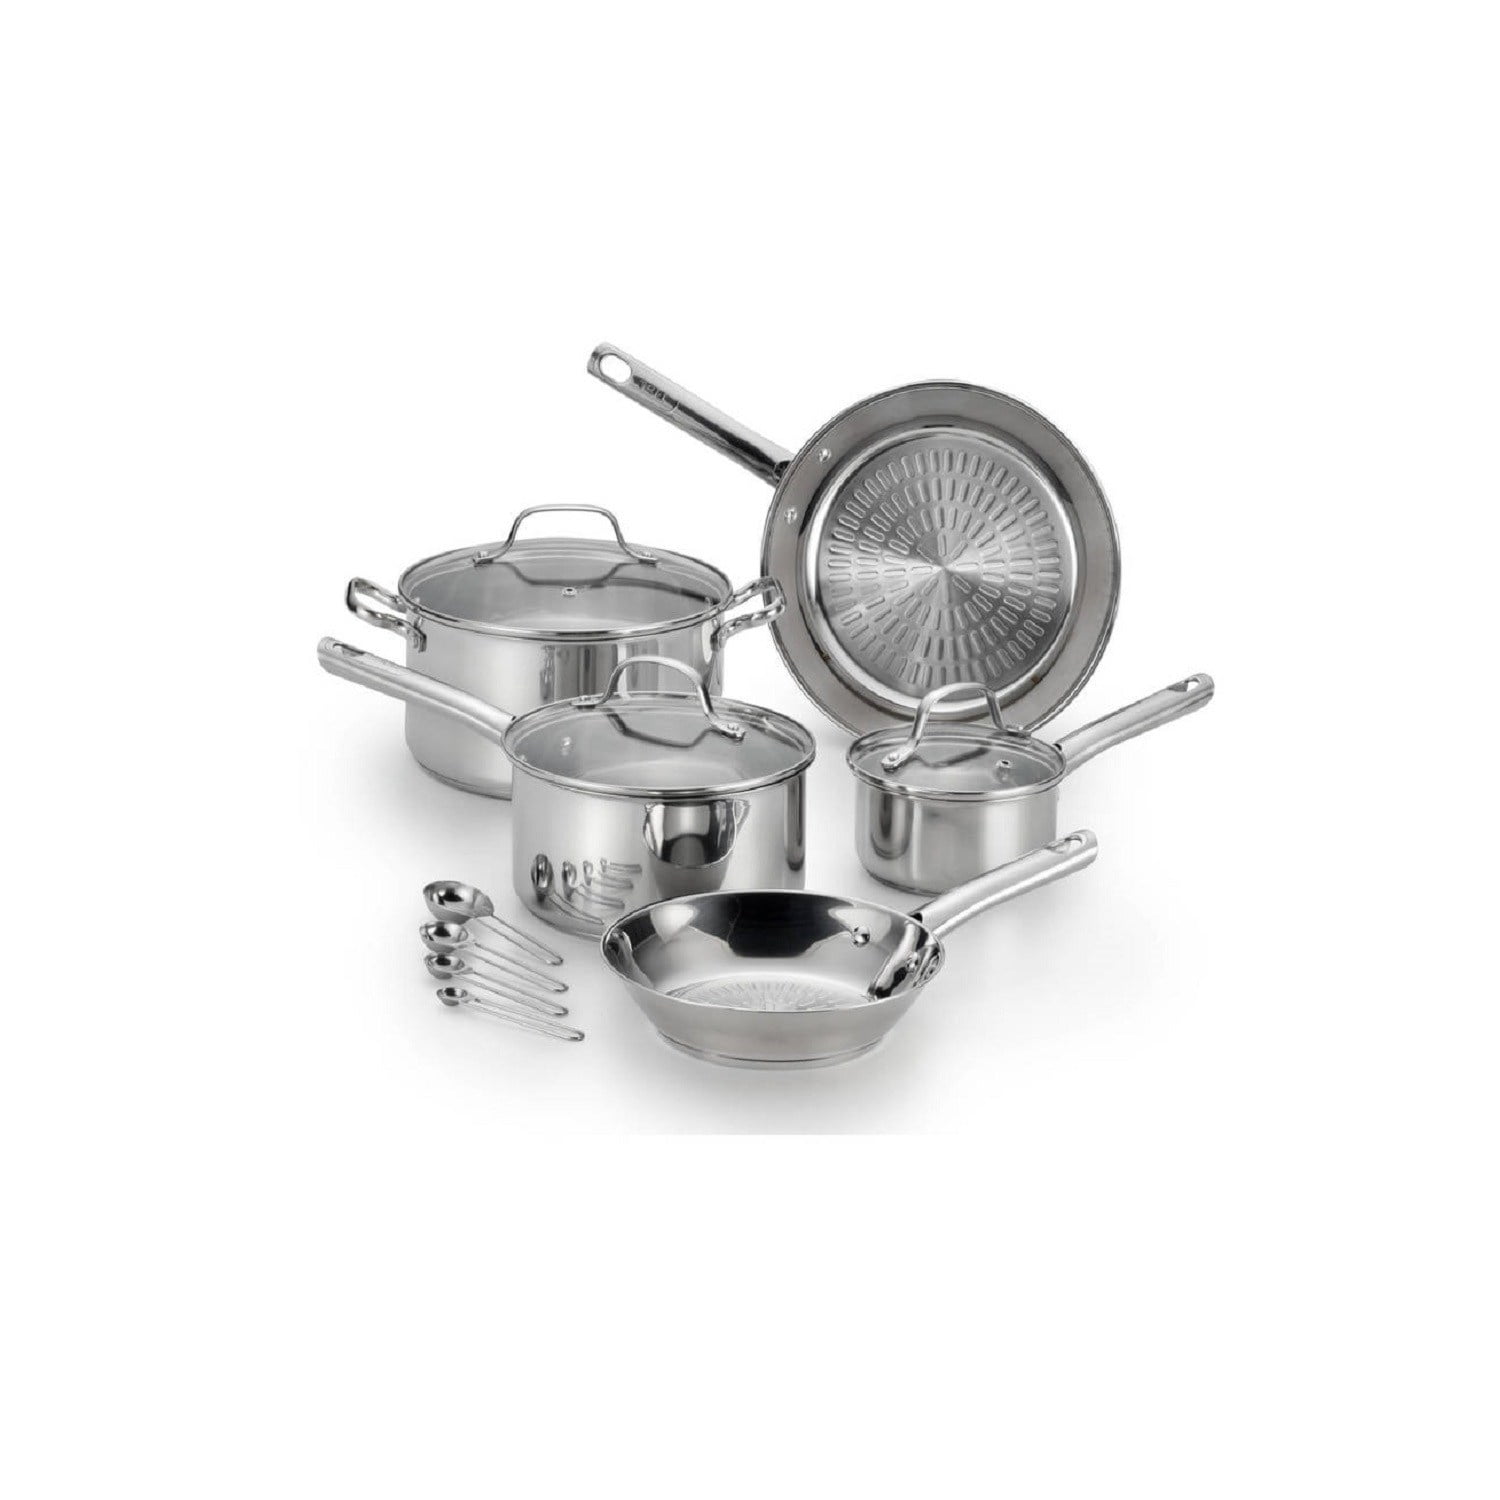 T-Fal Stainless Steel 12-Piece Cookware Set Fast Release Interior T Fal Induction Stainless Steel